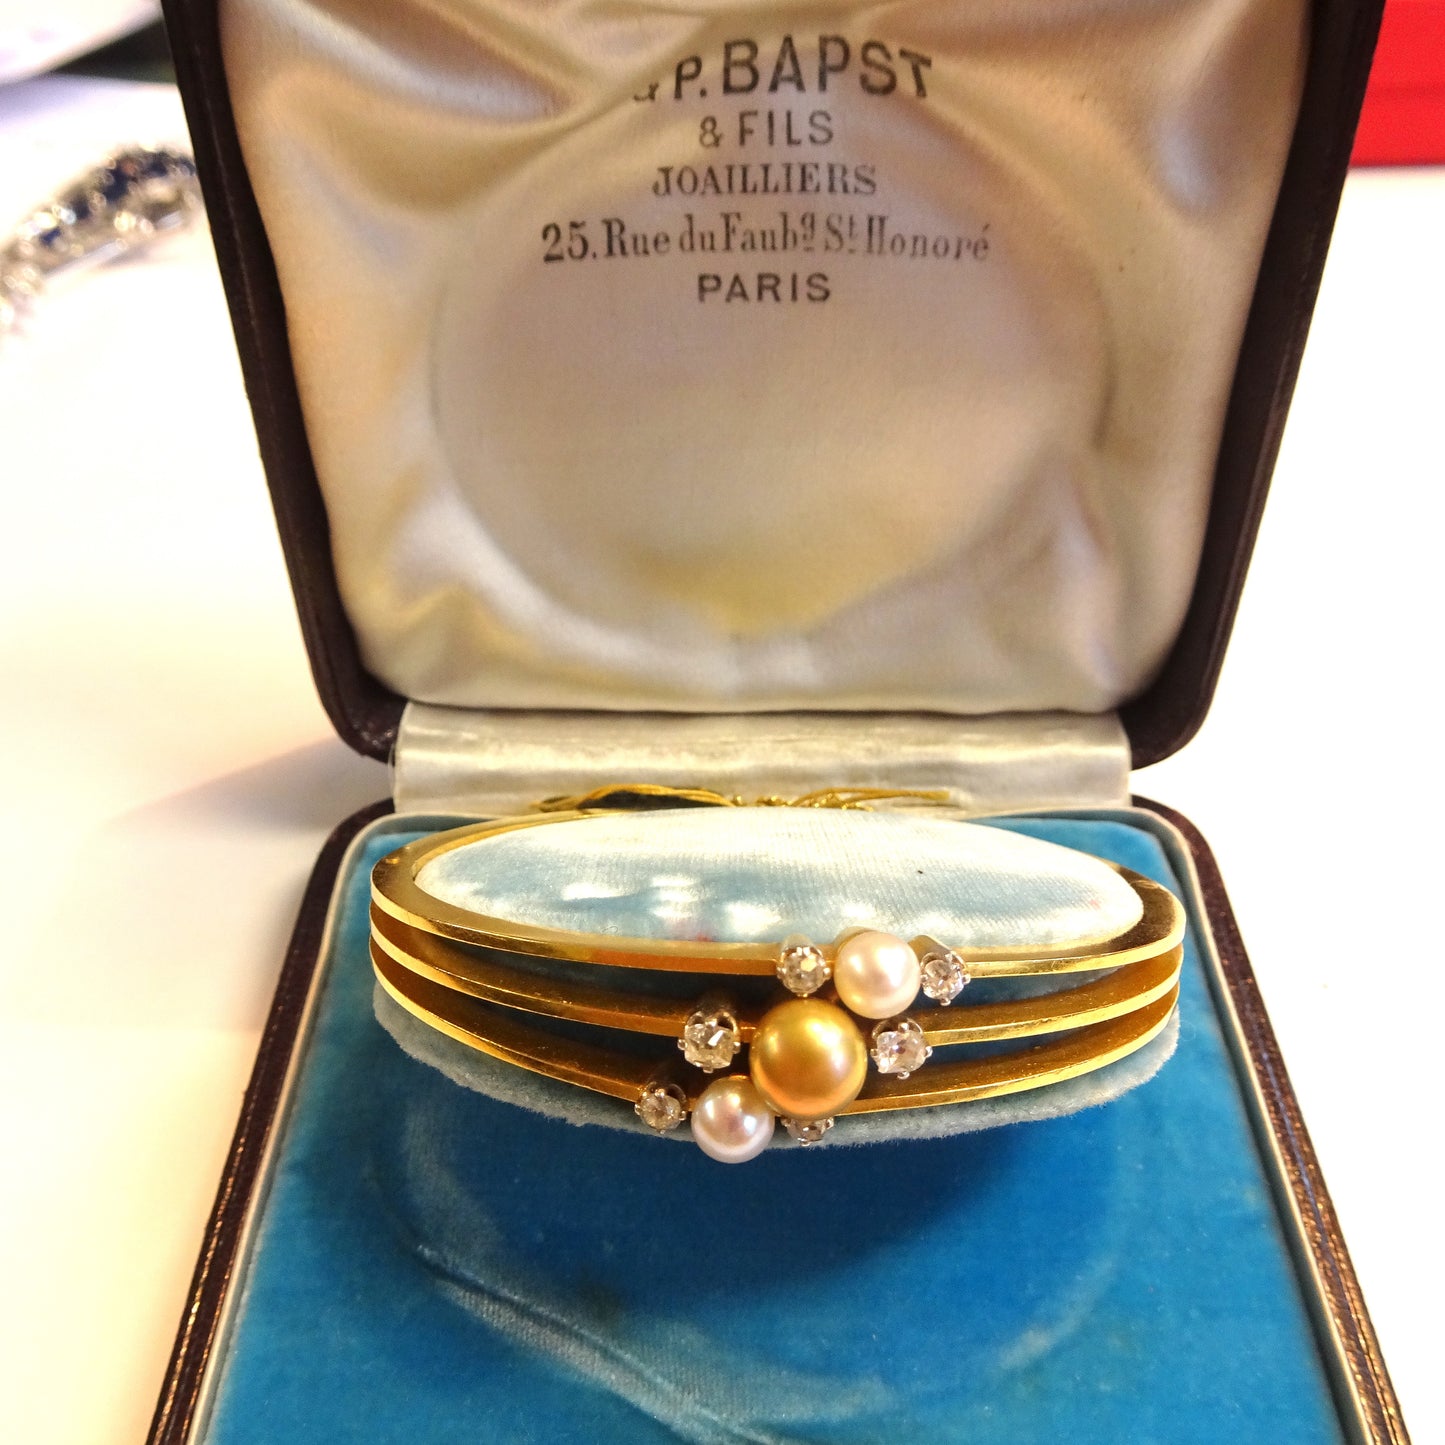 Bapst & Falize Paris Antique 18KT Yellow Gold Natural Pearl Bangle Bracelet in jewelry box